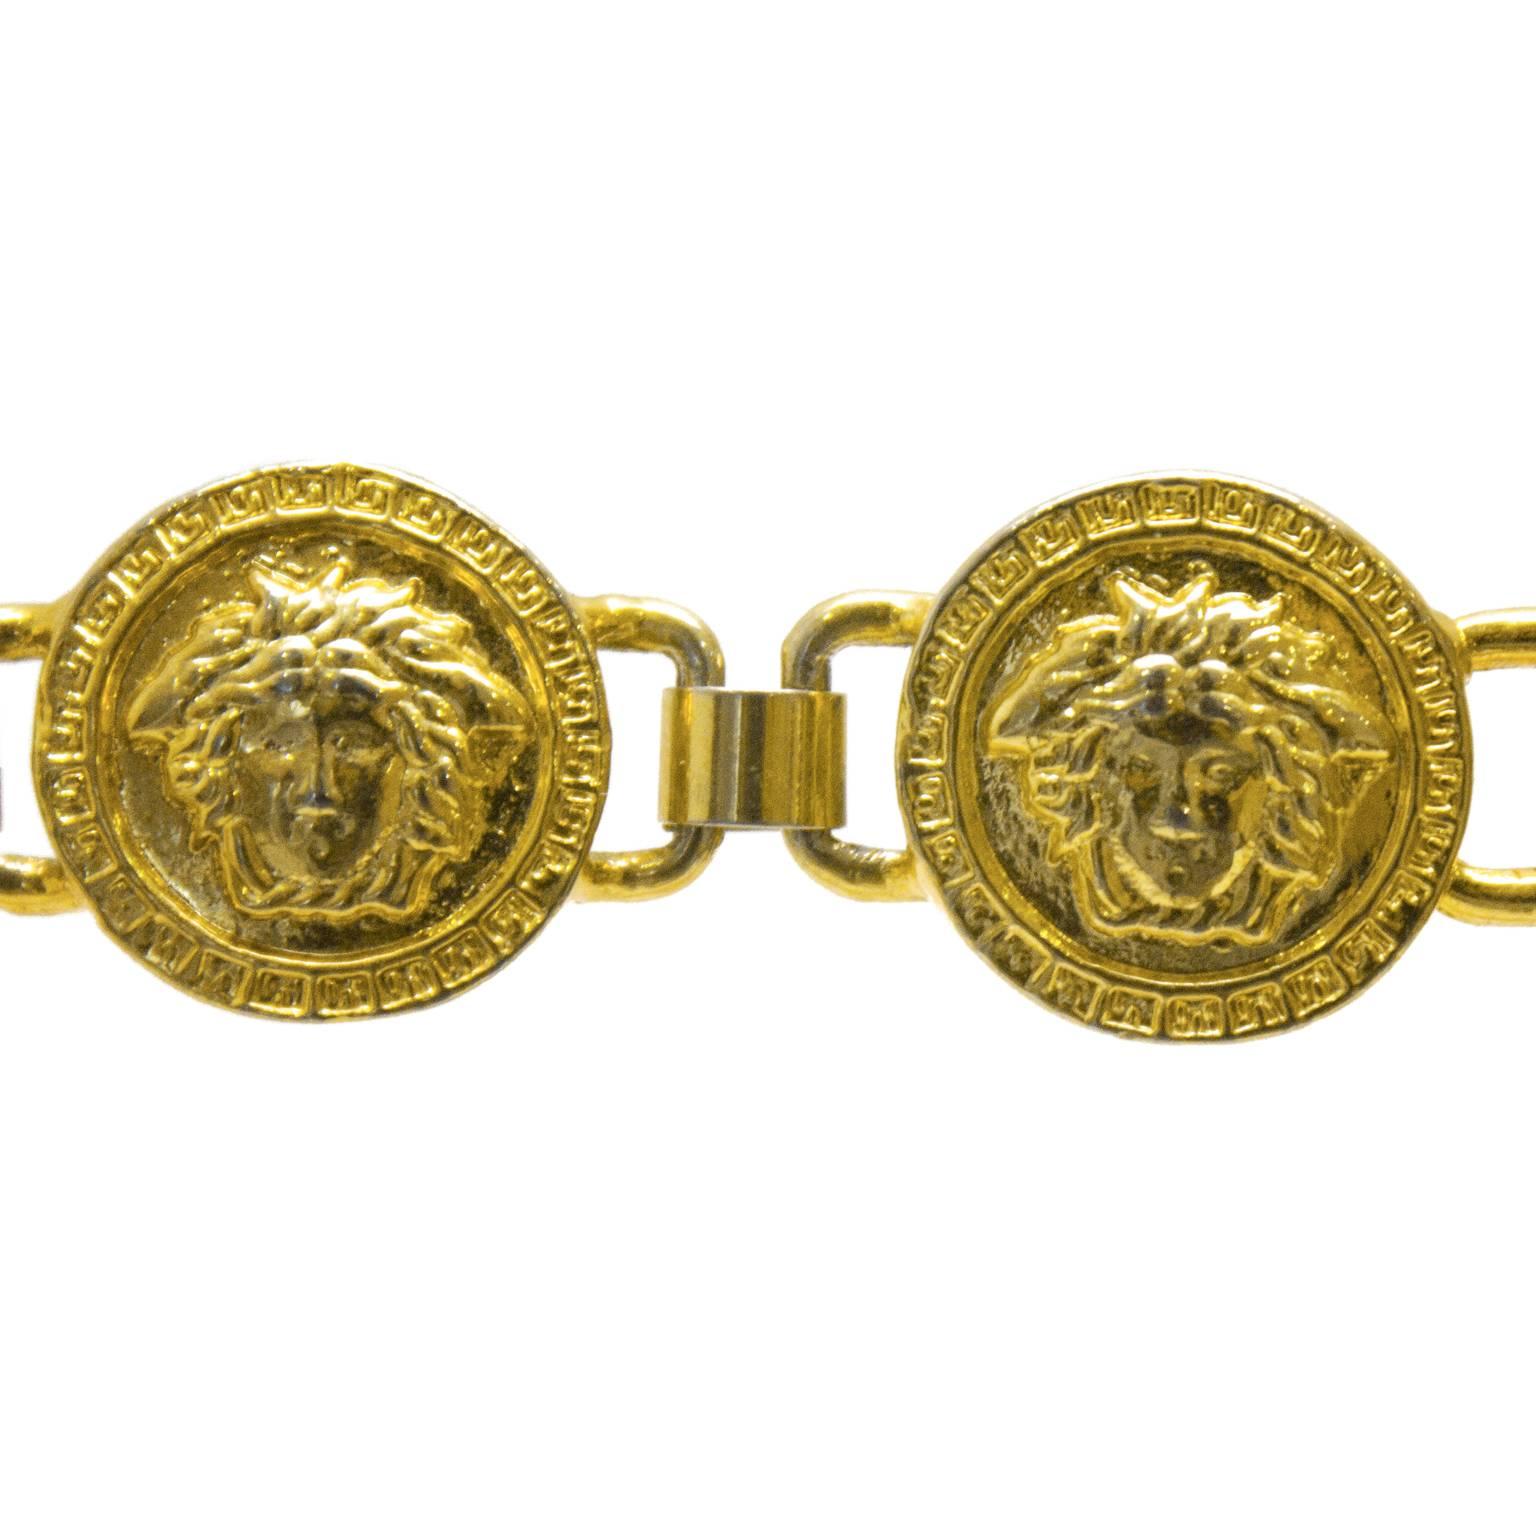 Versace goldtone link bracelet from the mid 1980’s. The coin charms feature the iconic Versace lion’s head with a Greek key border connected with square links. Closes with a fold over style clasp. Signed GIANNI VERSACE MADE IN ITALY under one of the